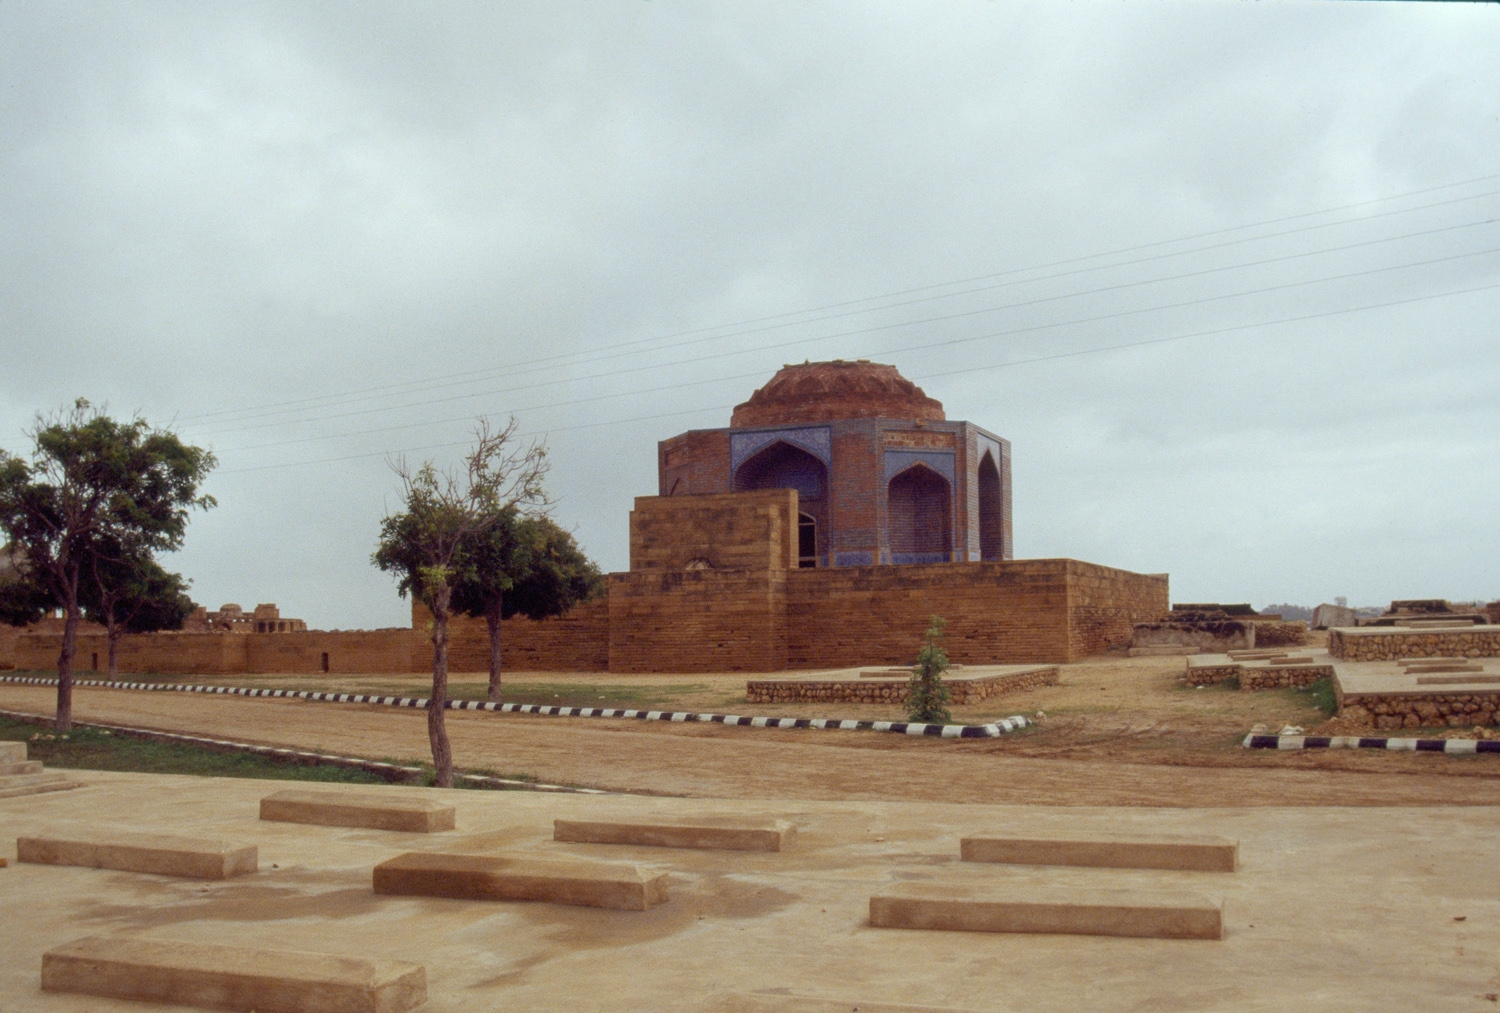 Distant view of tomb from outside enclosure